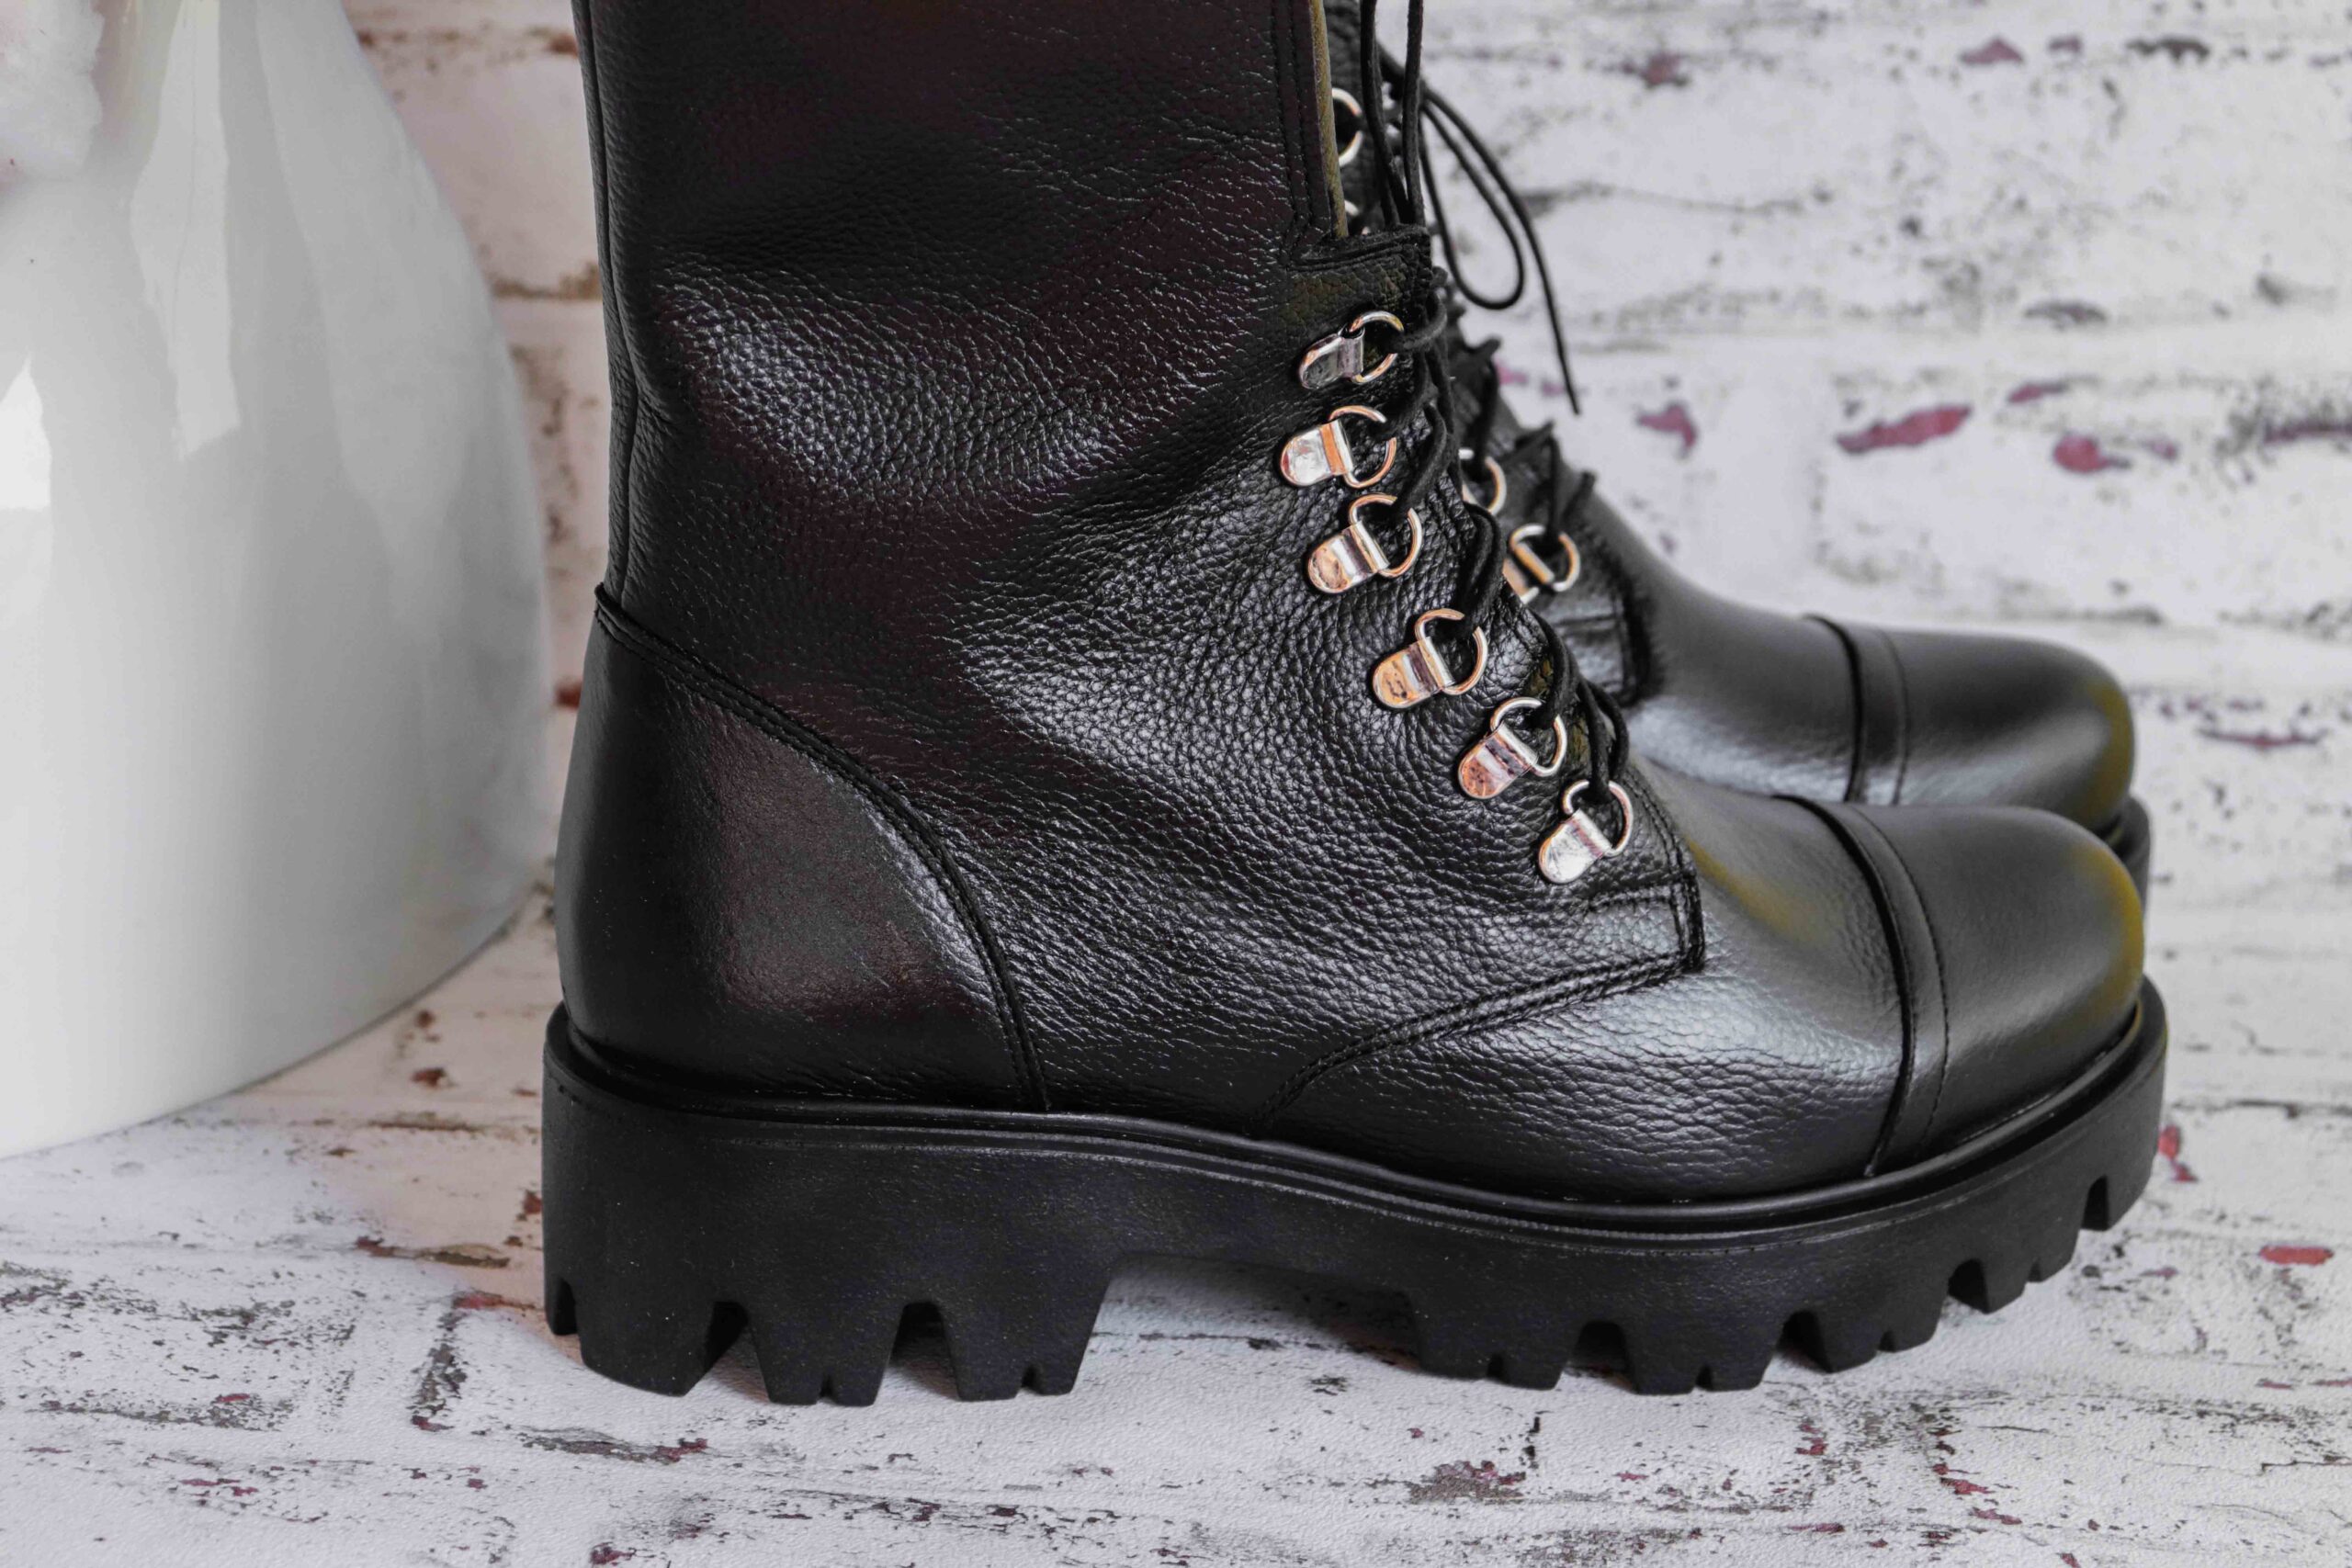 FUNKY FAB mid calf lace up boots in black leather